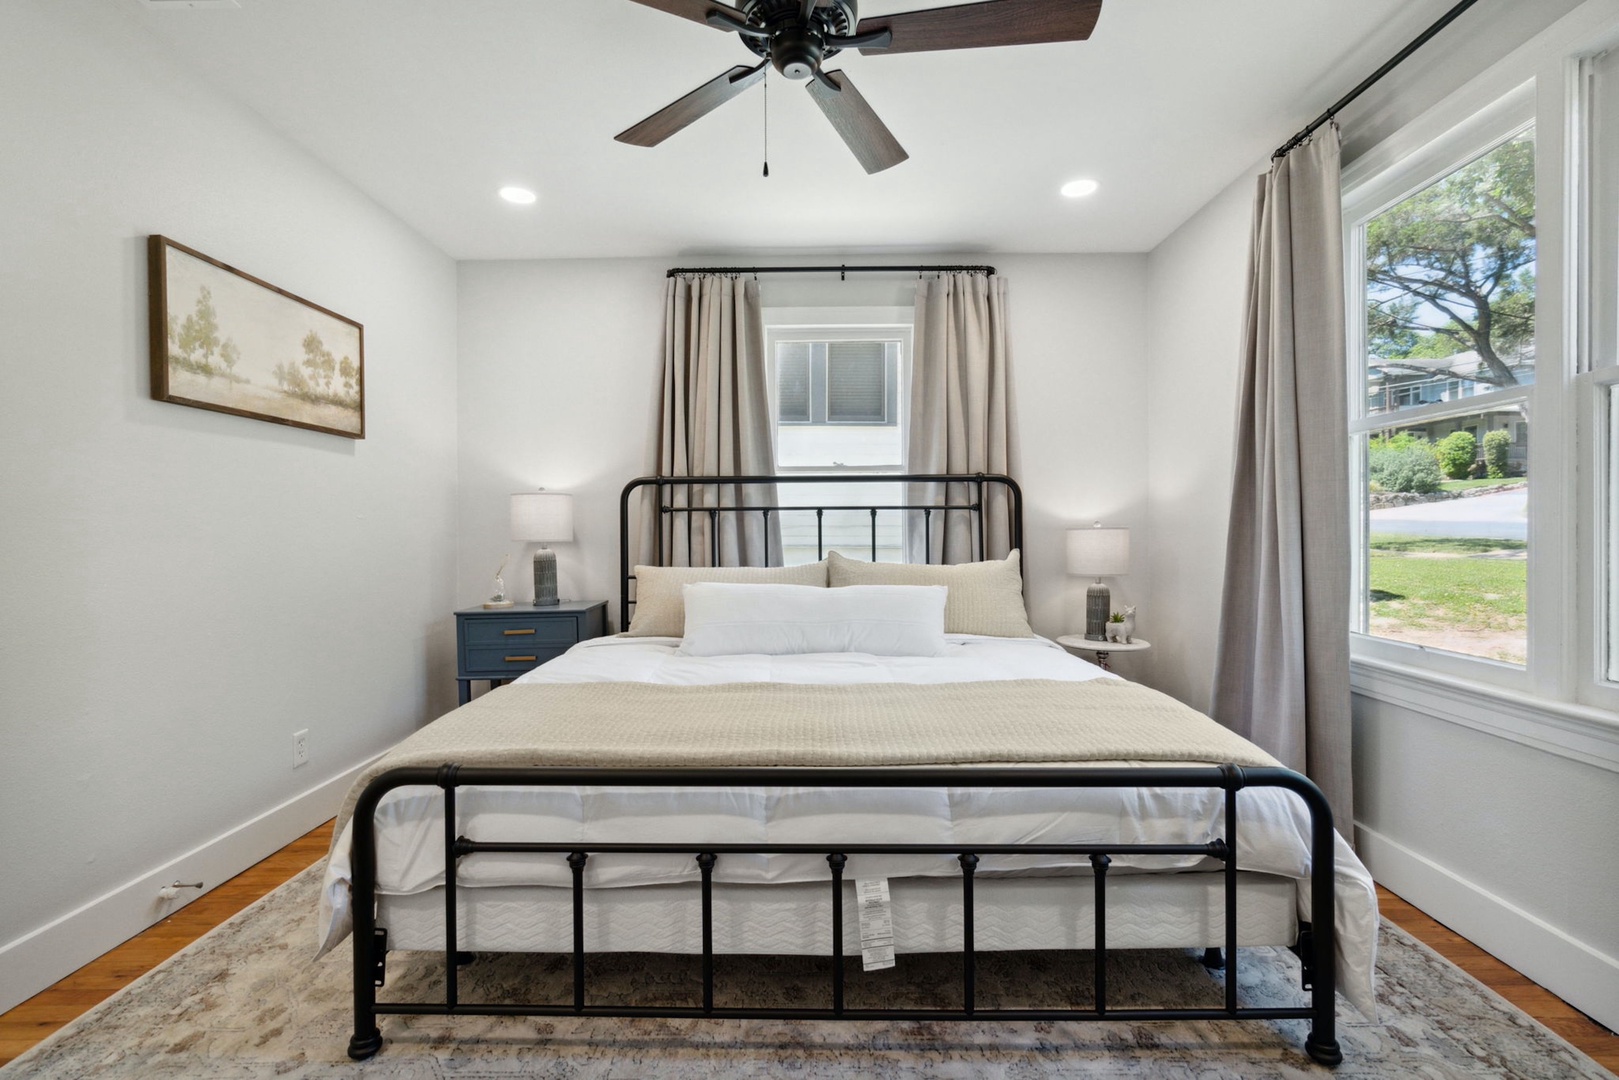 The second bedroom boasts a plush king-sized bed & Smart TV